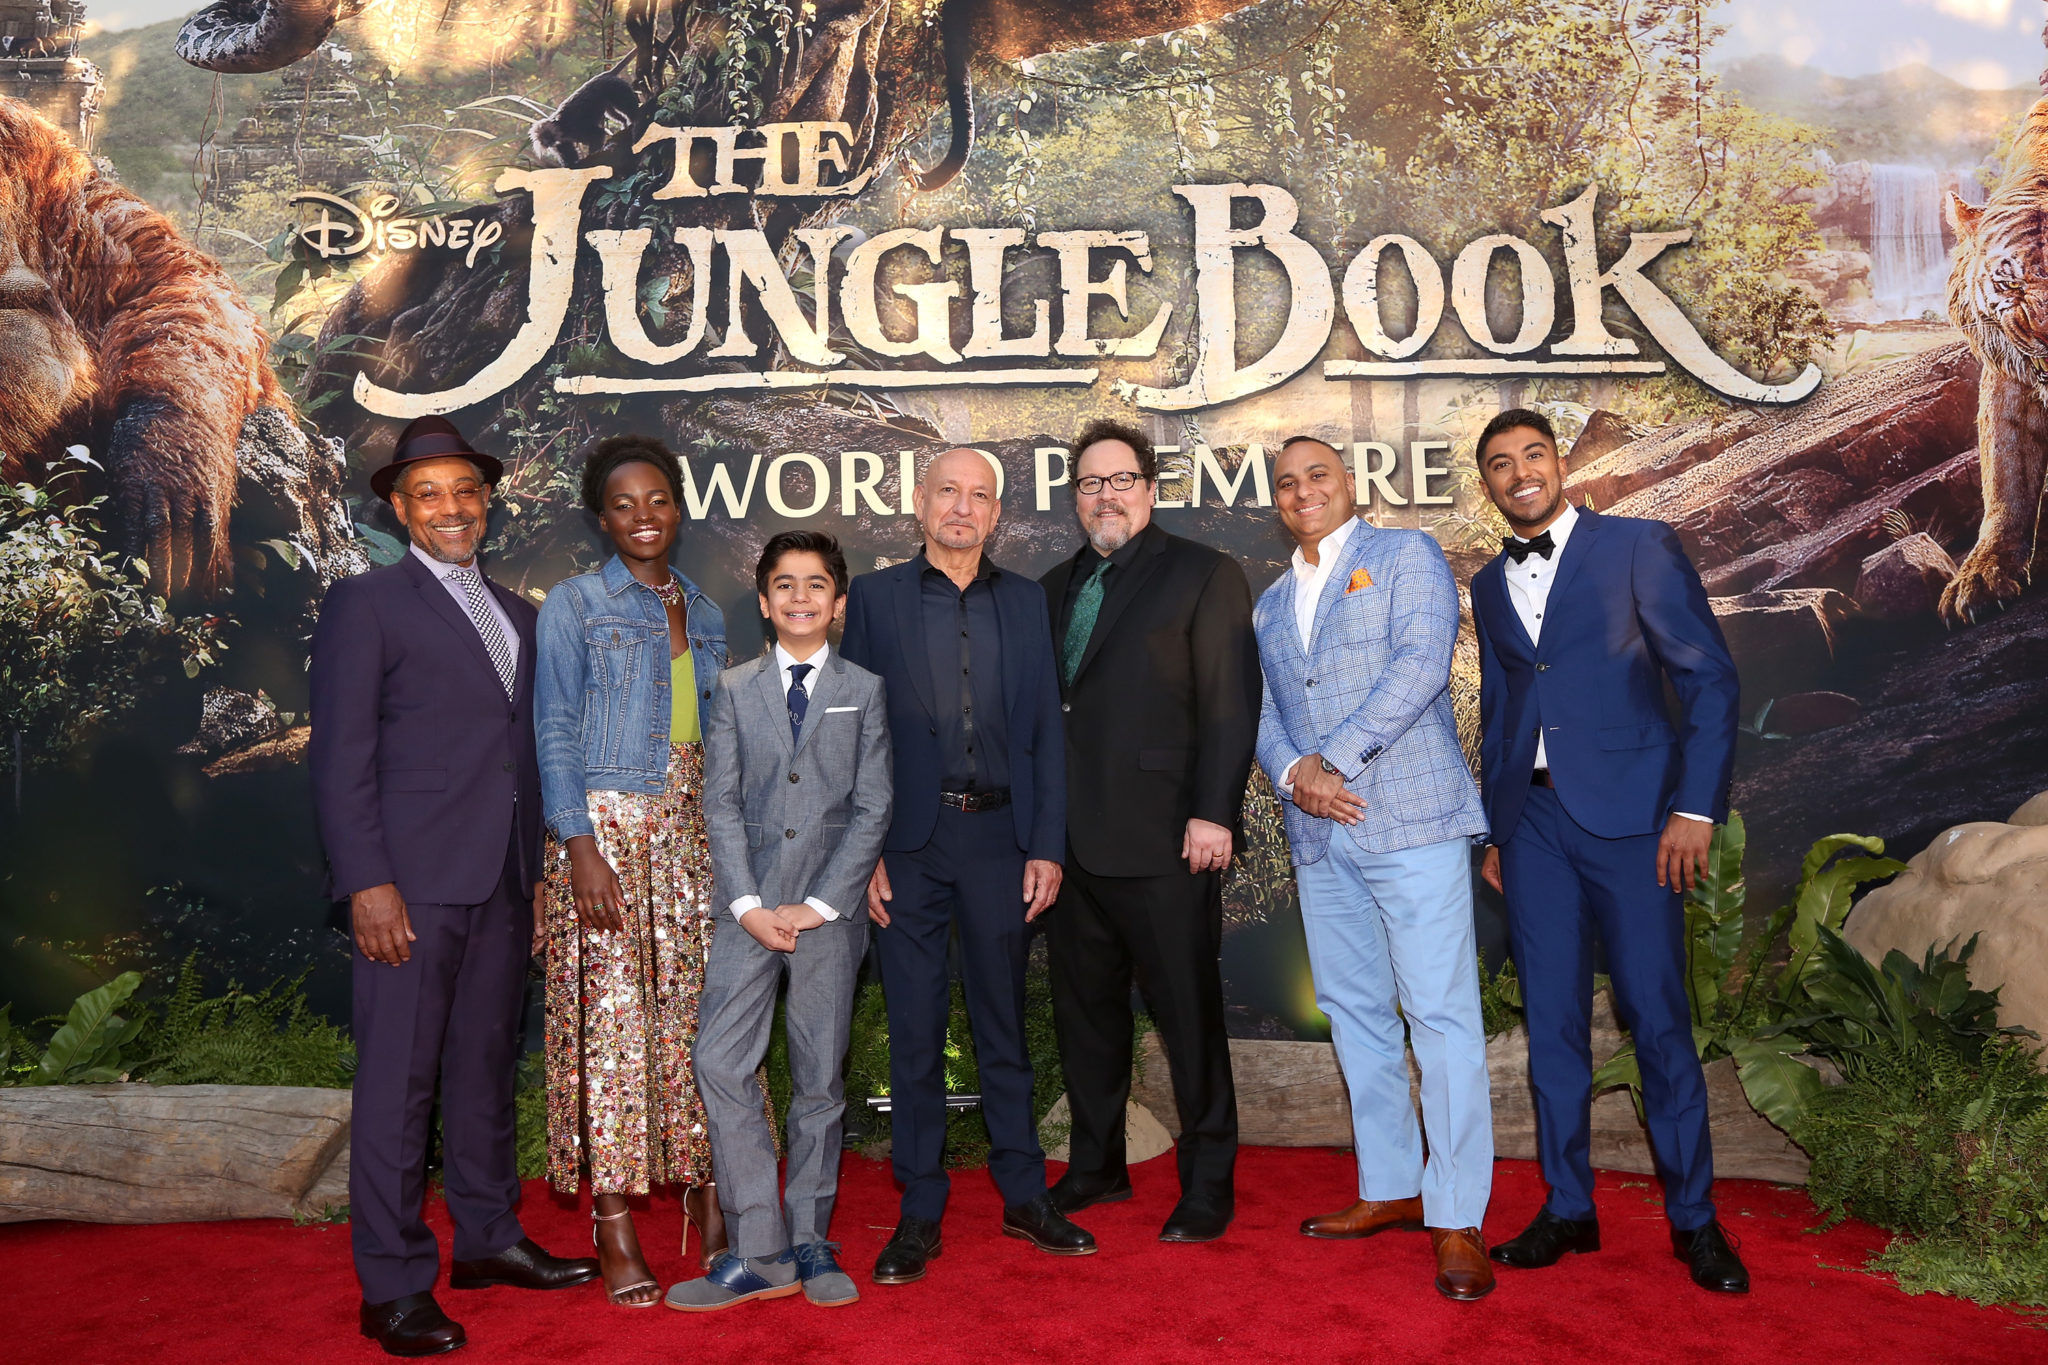 ‘The Jungle Book’ Red Carpet World Premiere In Hollywood